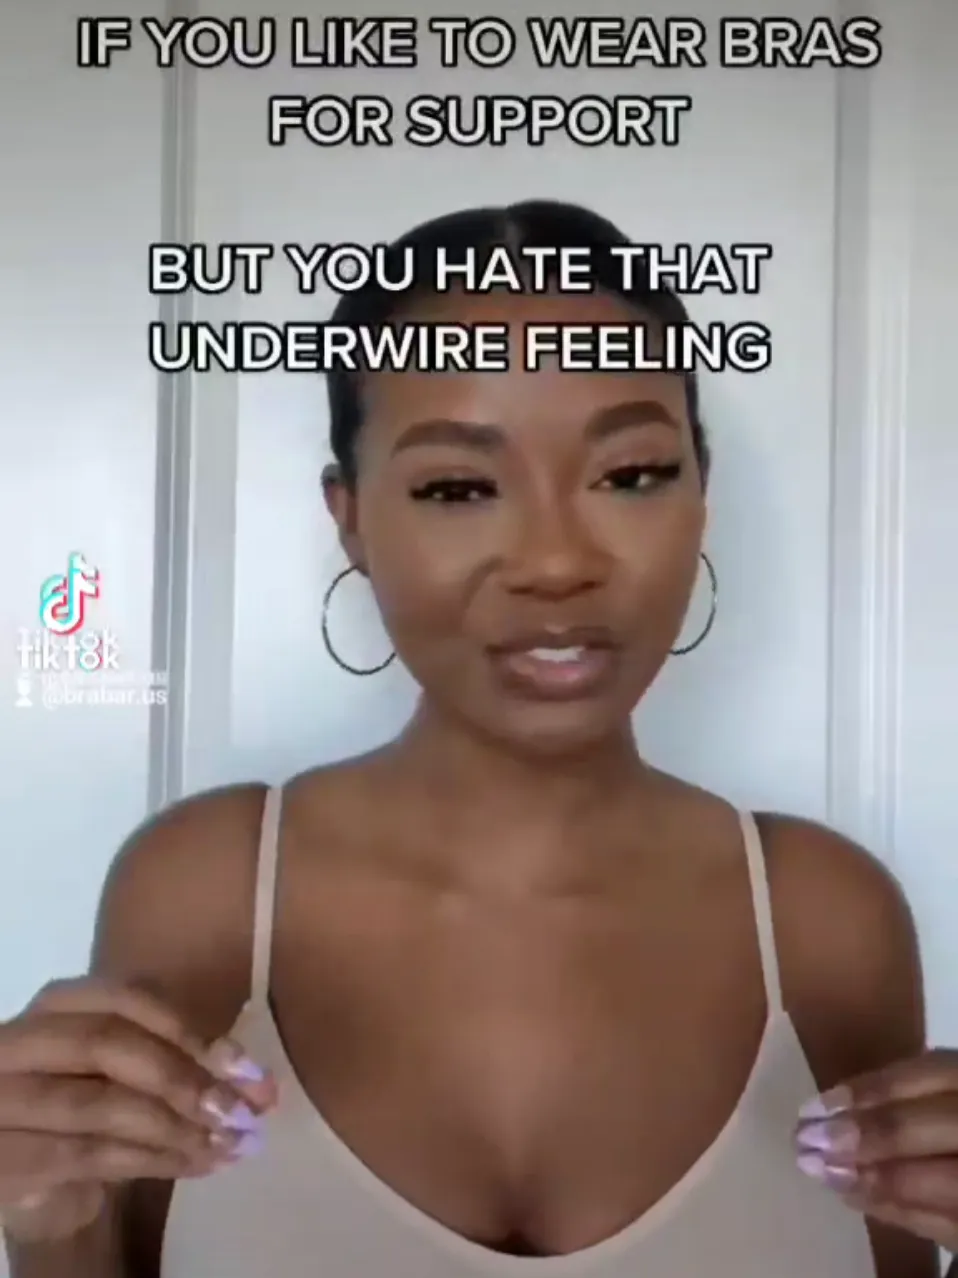 Do you hate underwire bras?, Video published by BRABAR